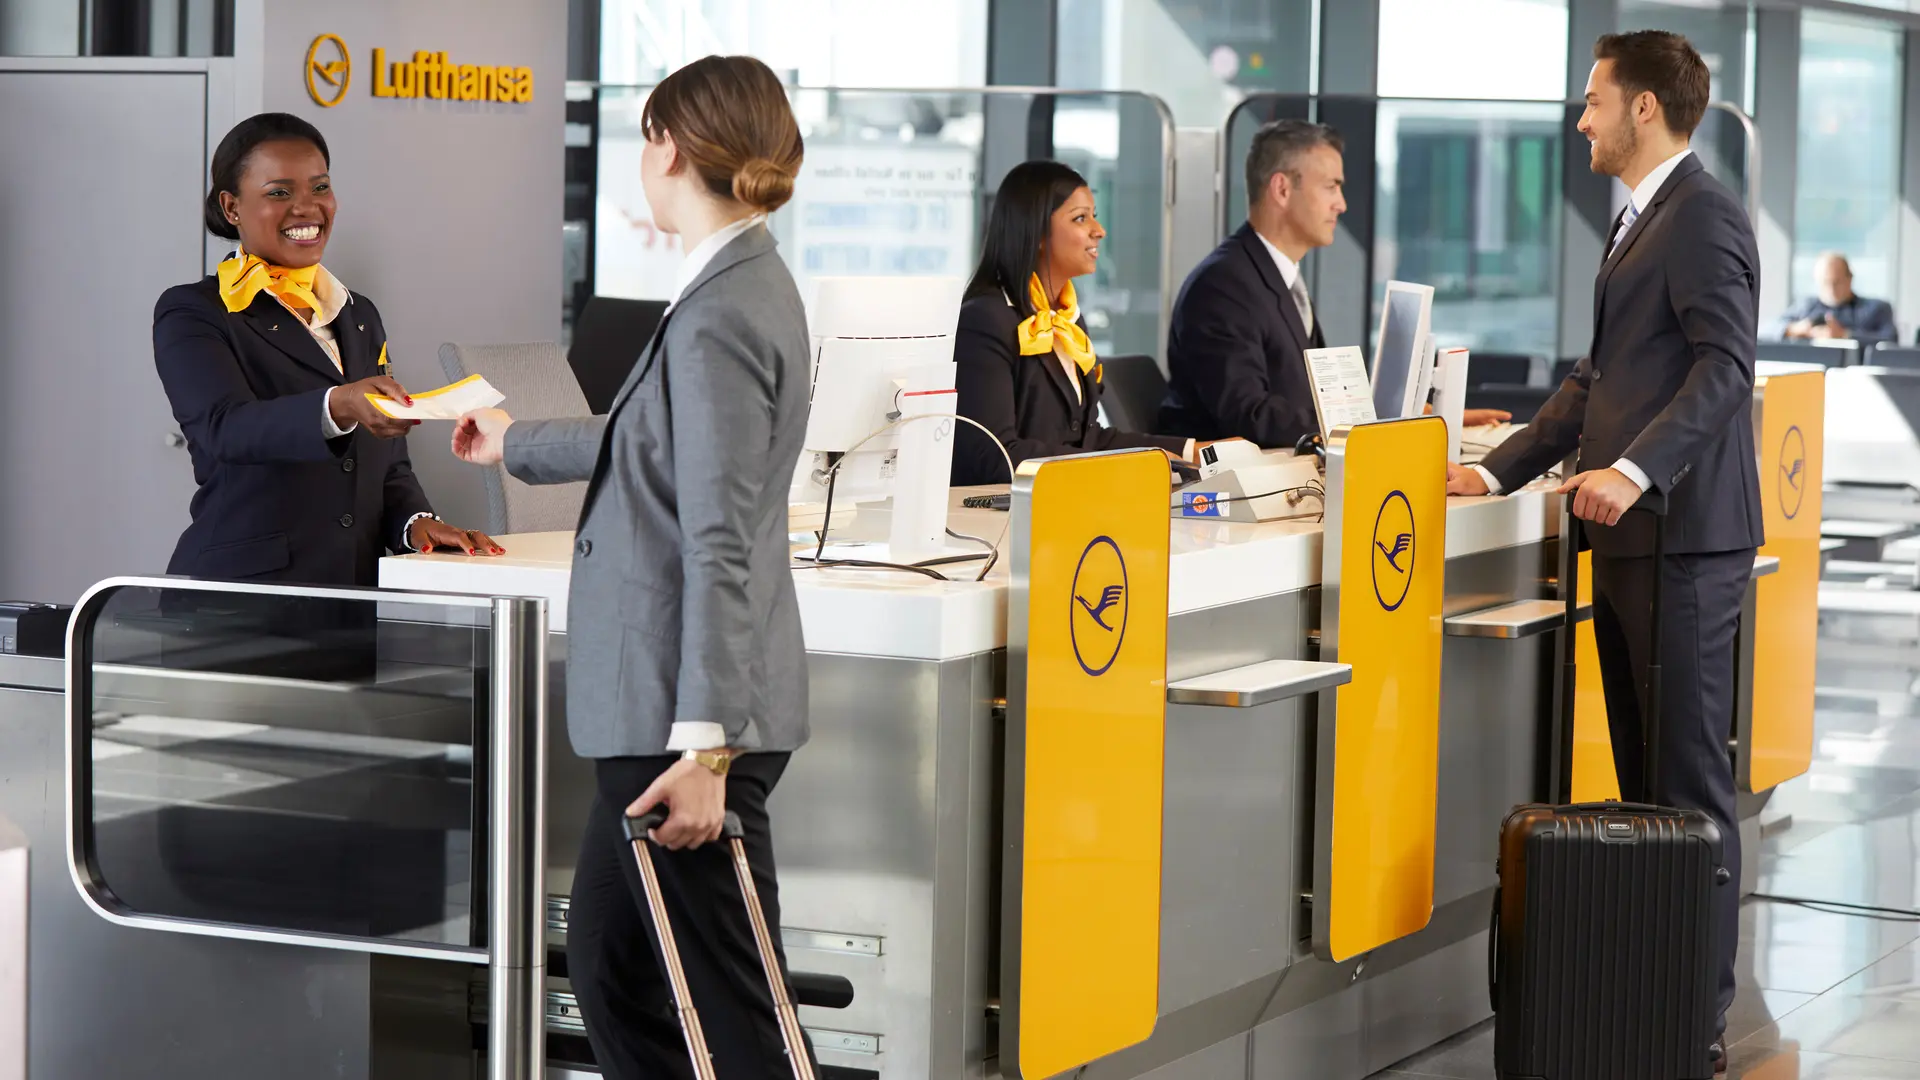 Airline review Airport experience - Lufthansa - 10